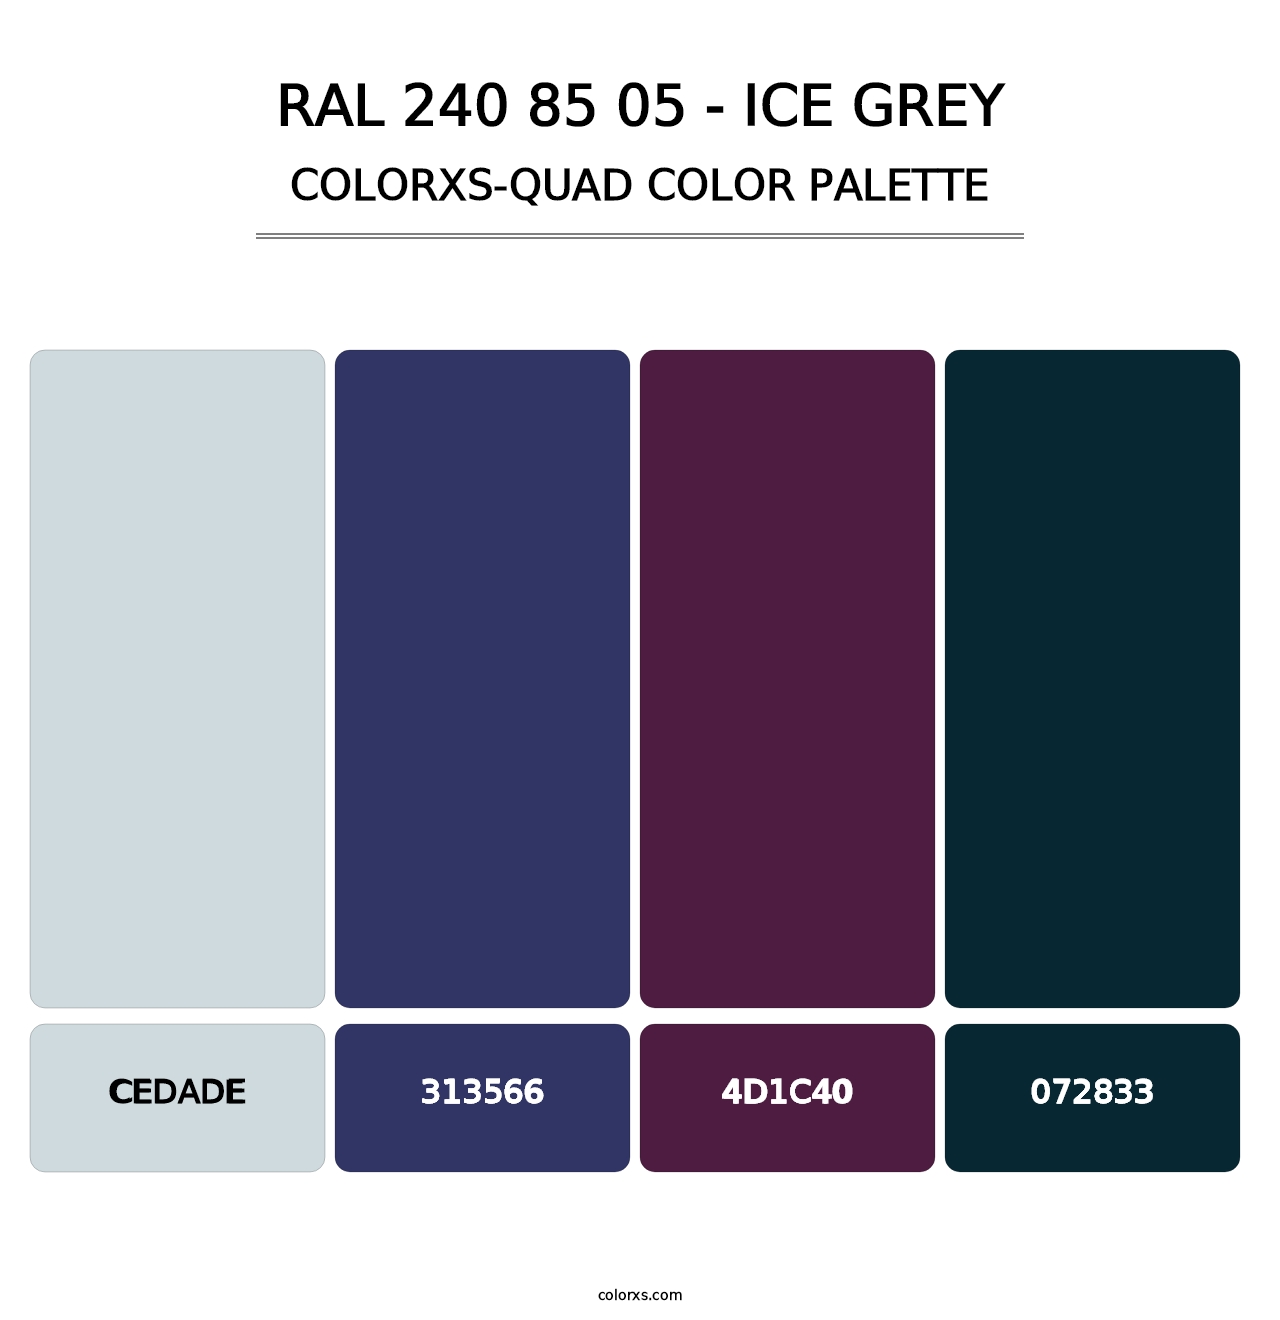 RAL 240 85 05 - Ice Grey - Colorxs Quad Palette